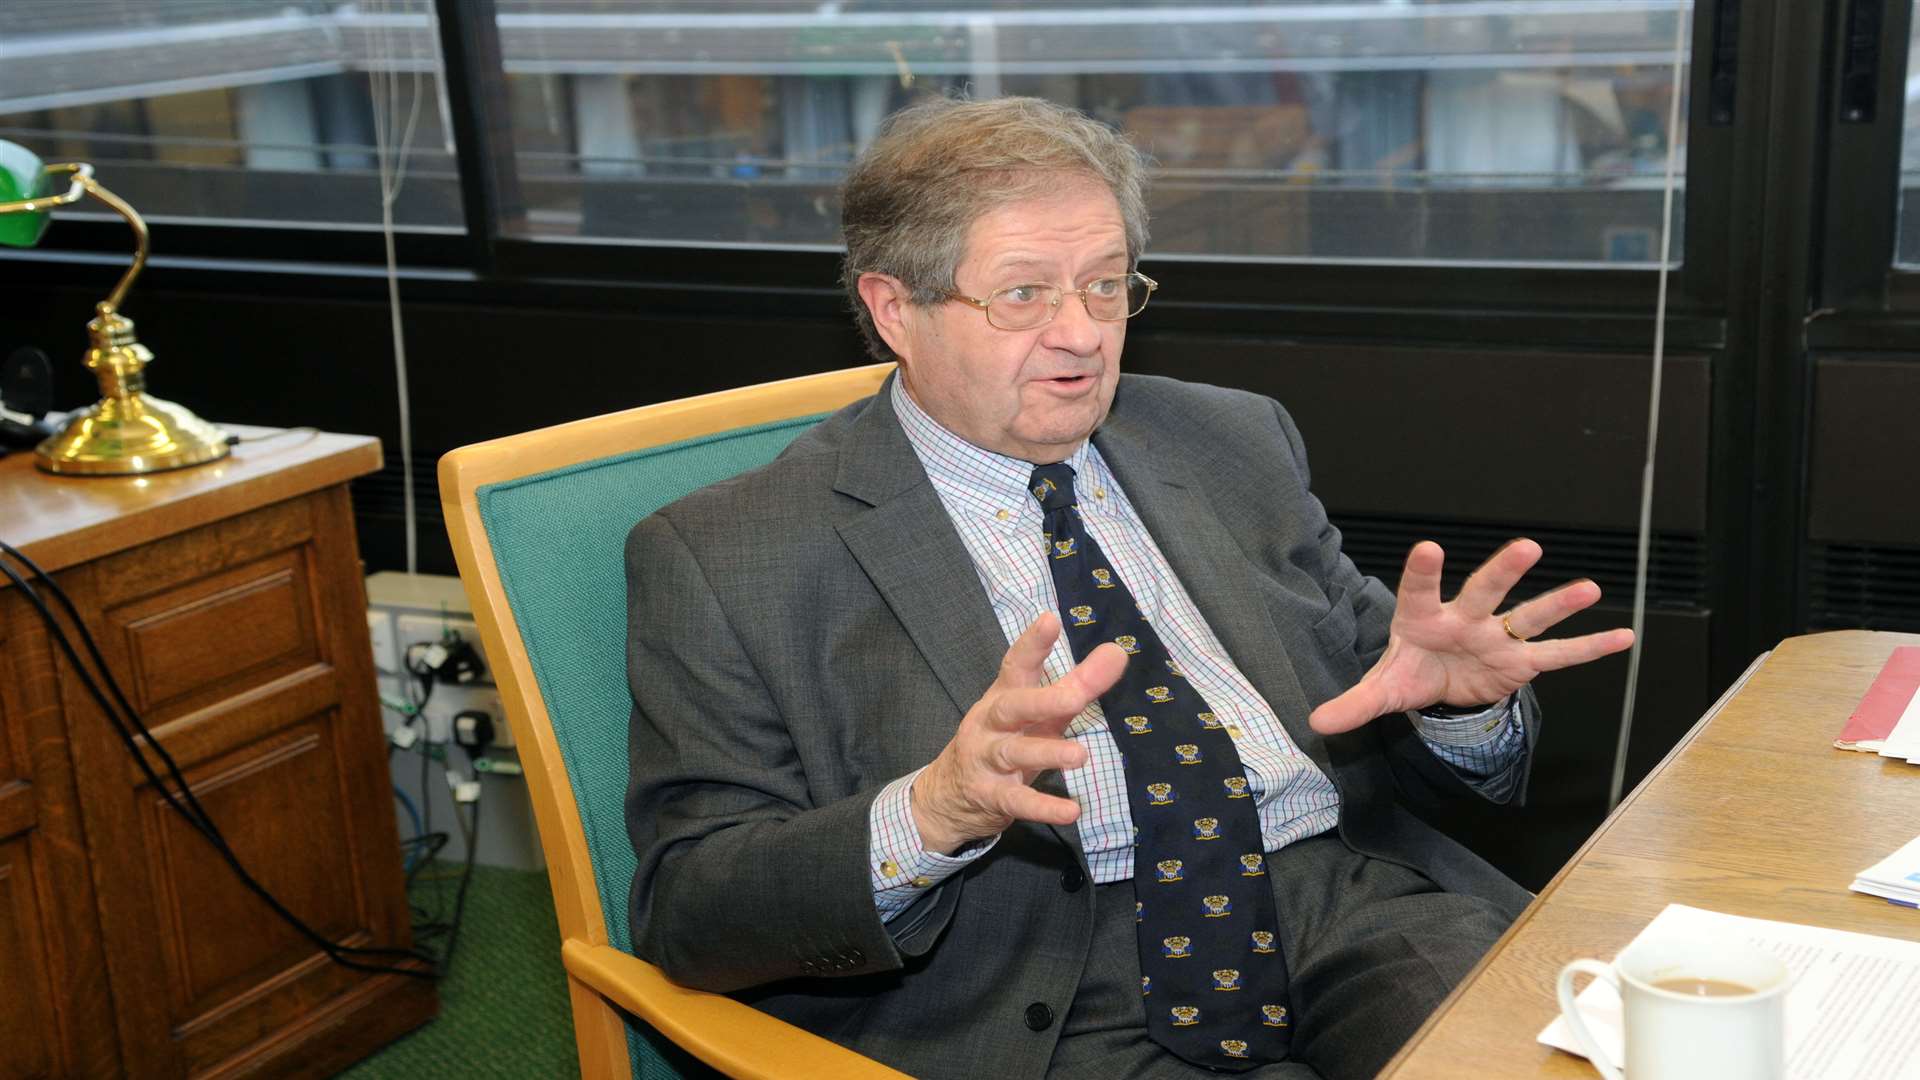 Rodney Chambers is stepping down as leader of Medway Council